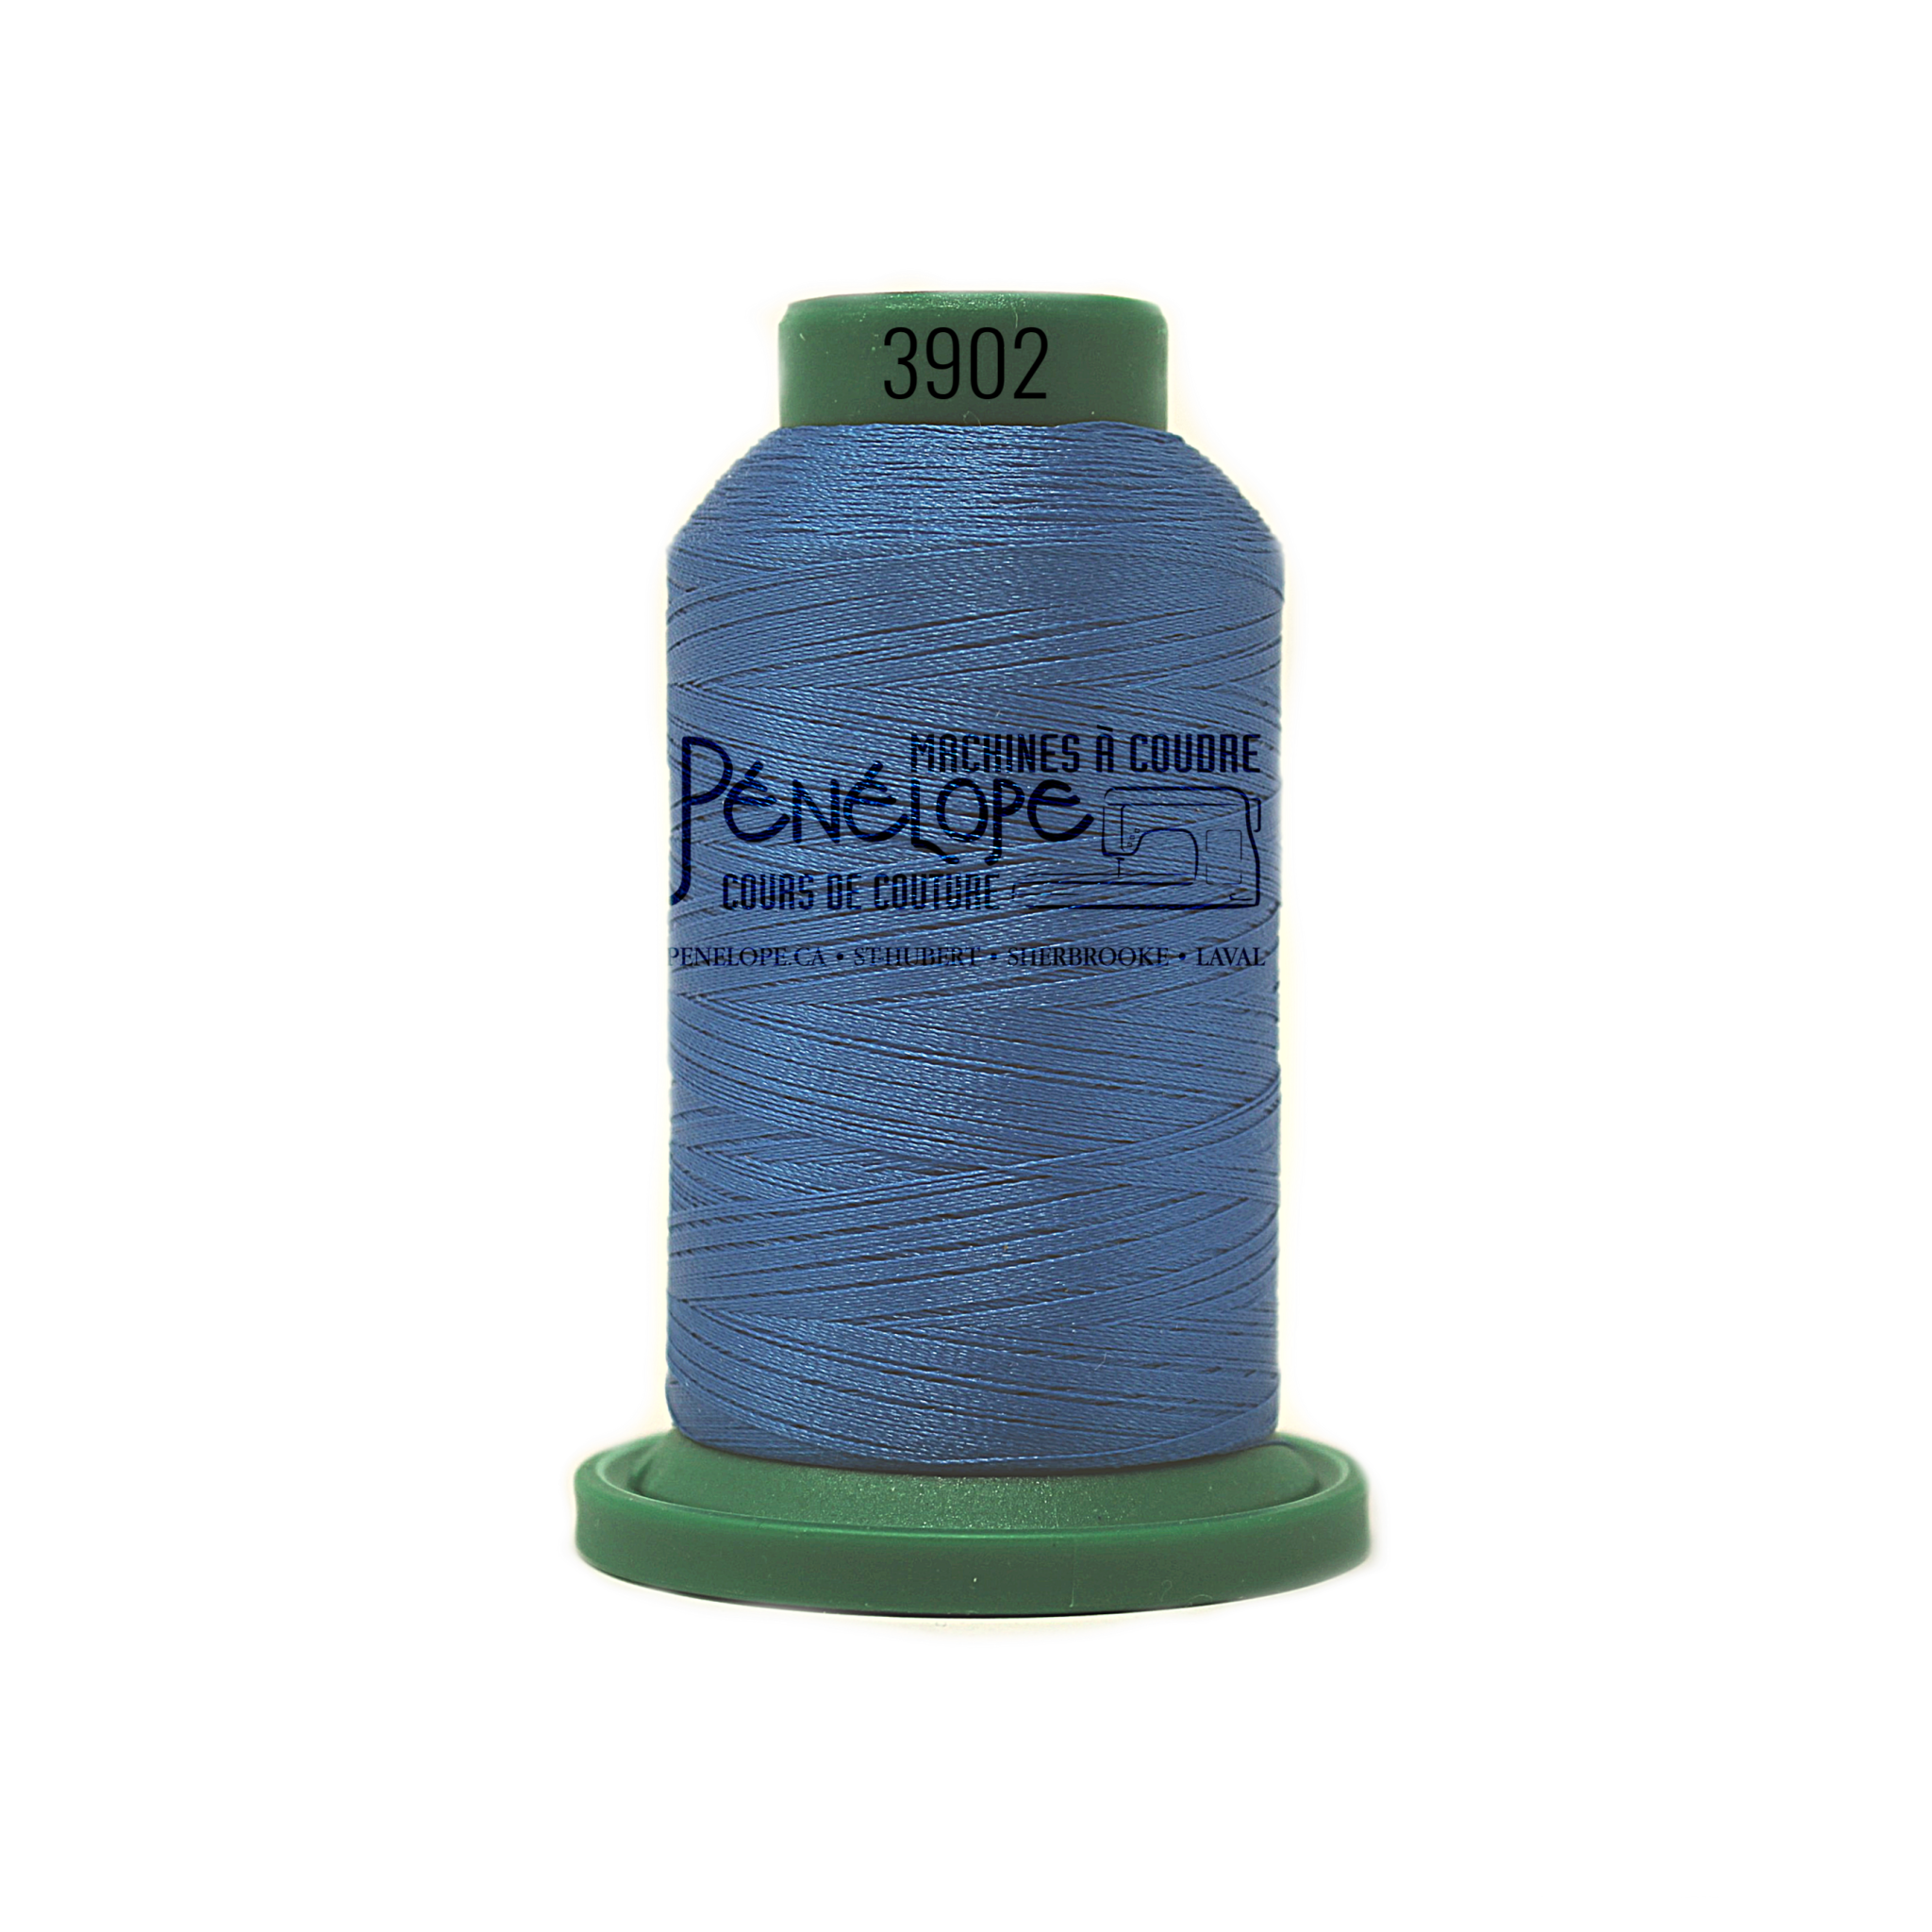 Isacord Isacord sewing and embroidery thread 3902